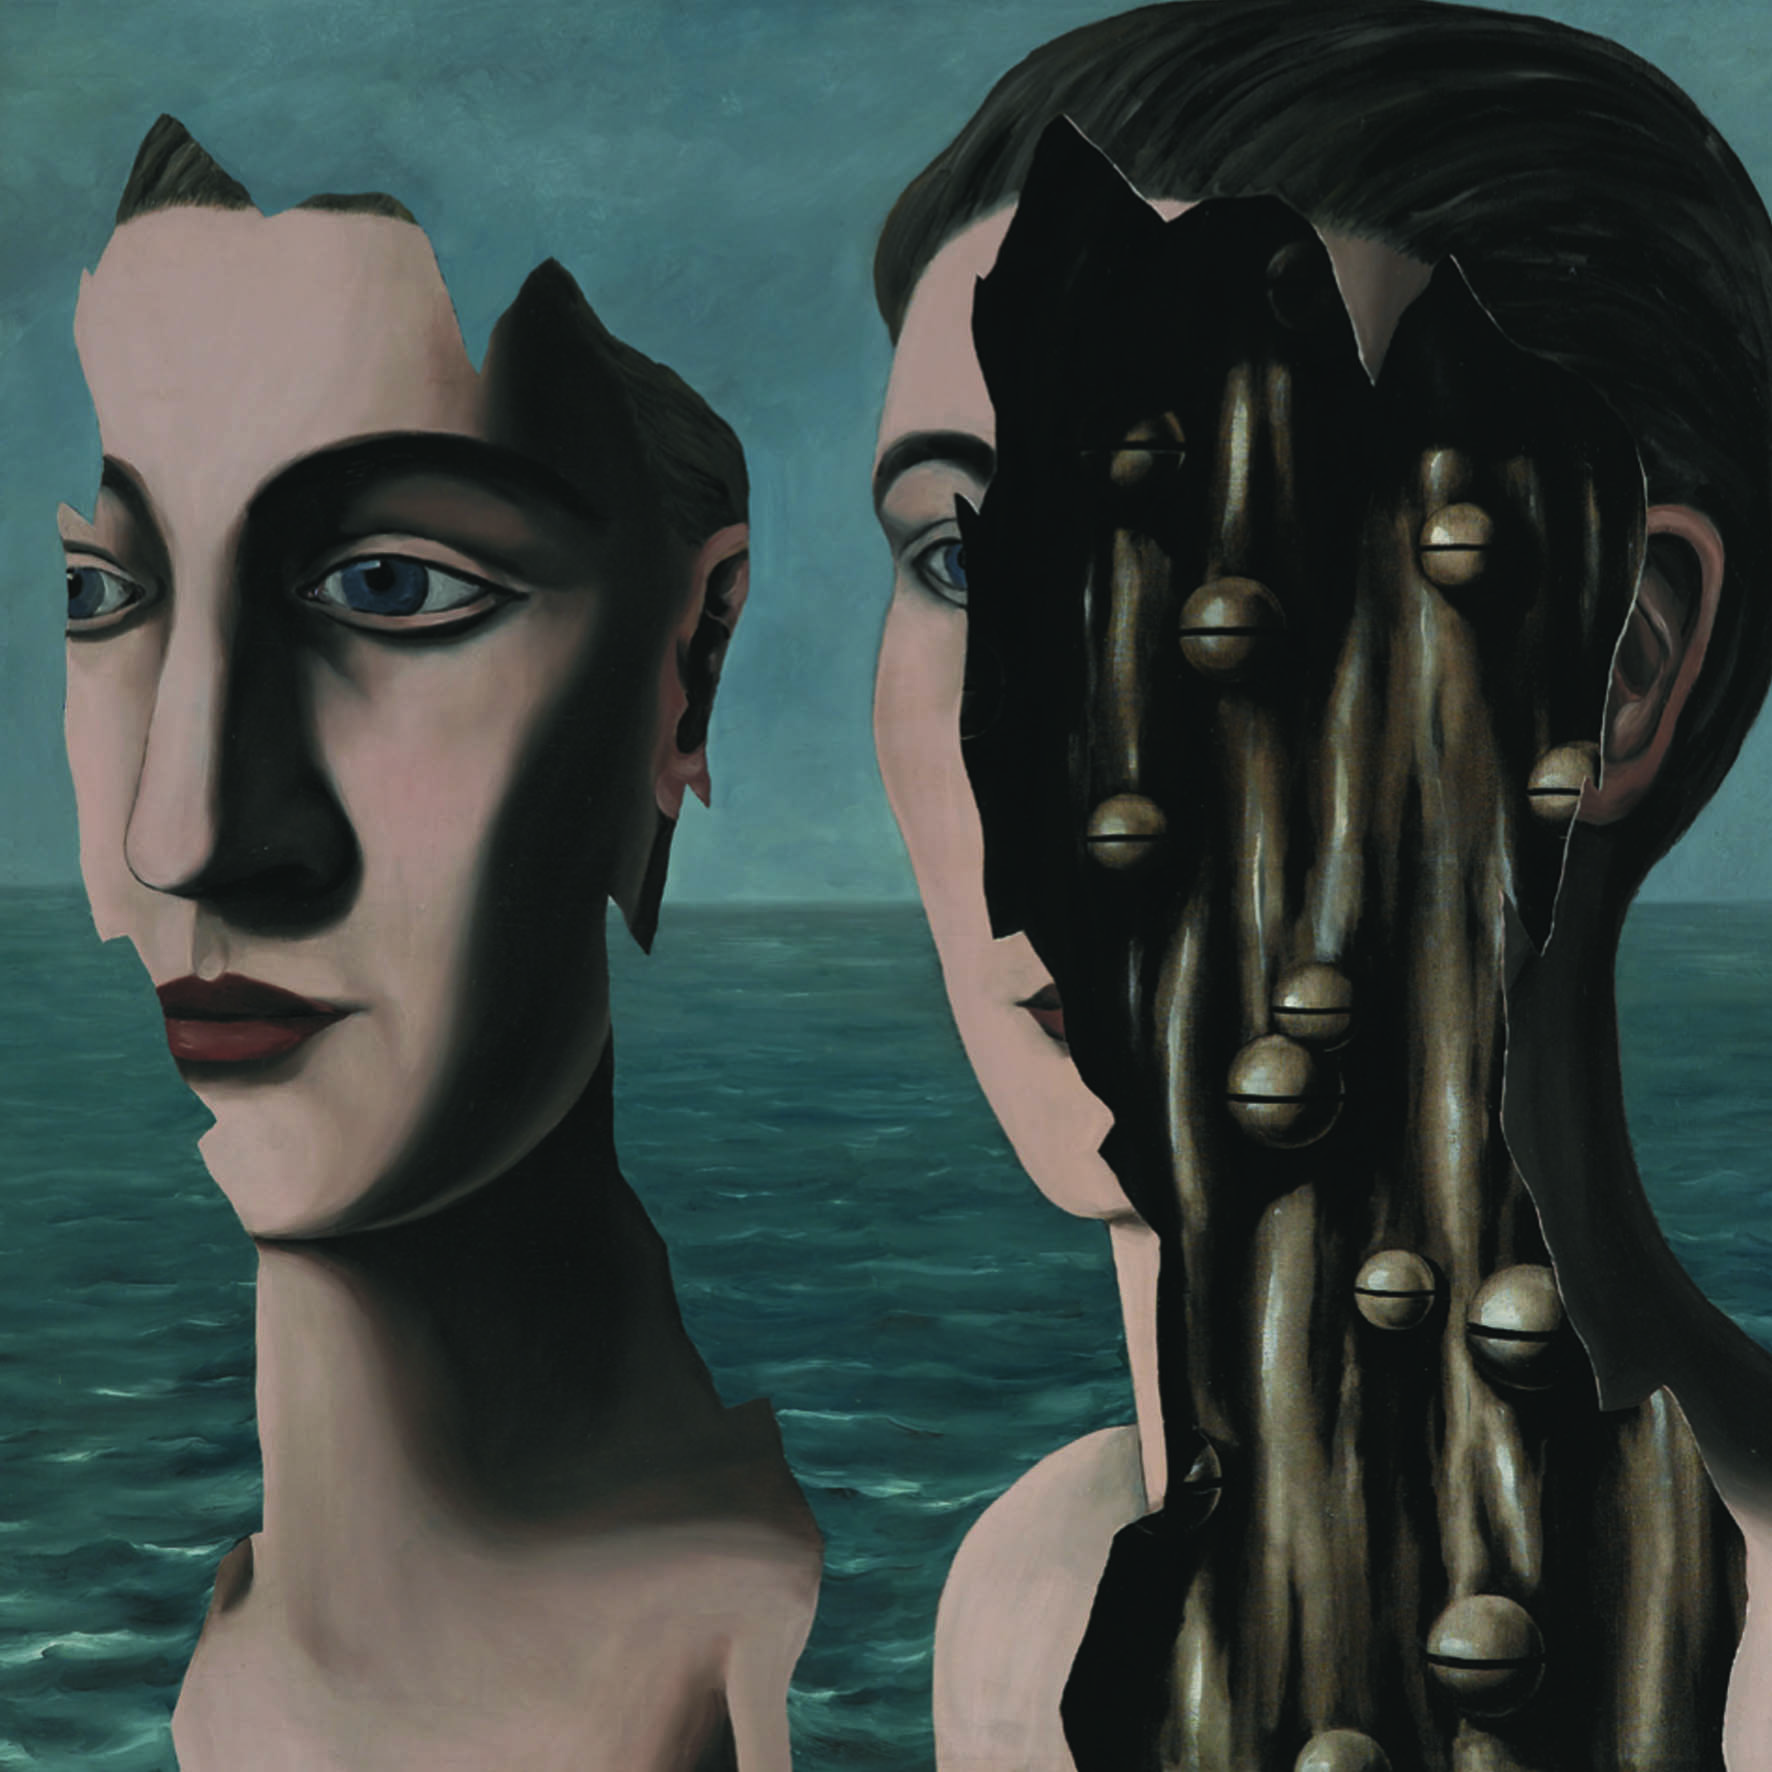 1929: SURREALISM FROM THE POMPIDOU